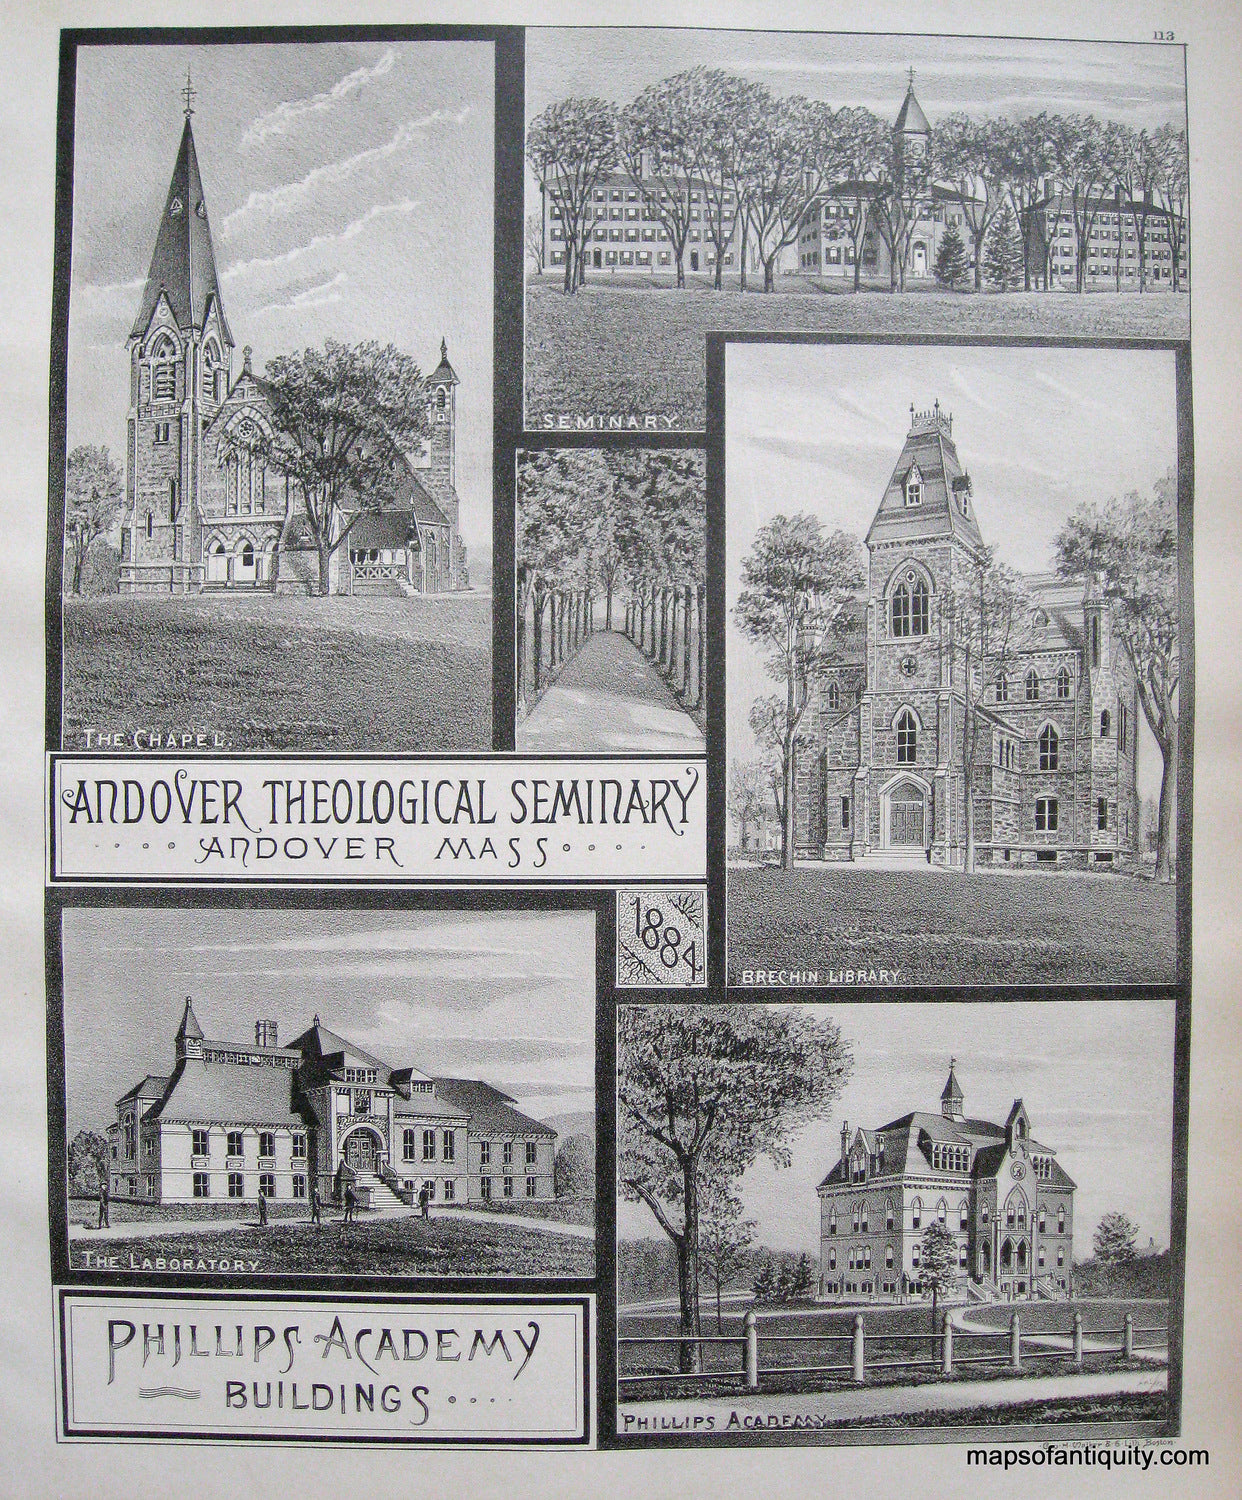 Black-and-White-Antique-Print-Andover-Theological-Seminary-Andover-MA-Phillips-Academy-US-Colleges-North-east-colleges-1884-Walker-Maps-Of-Antiquity